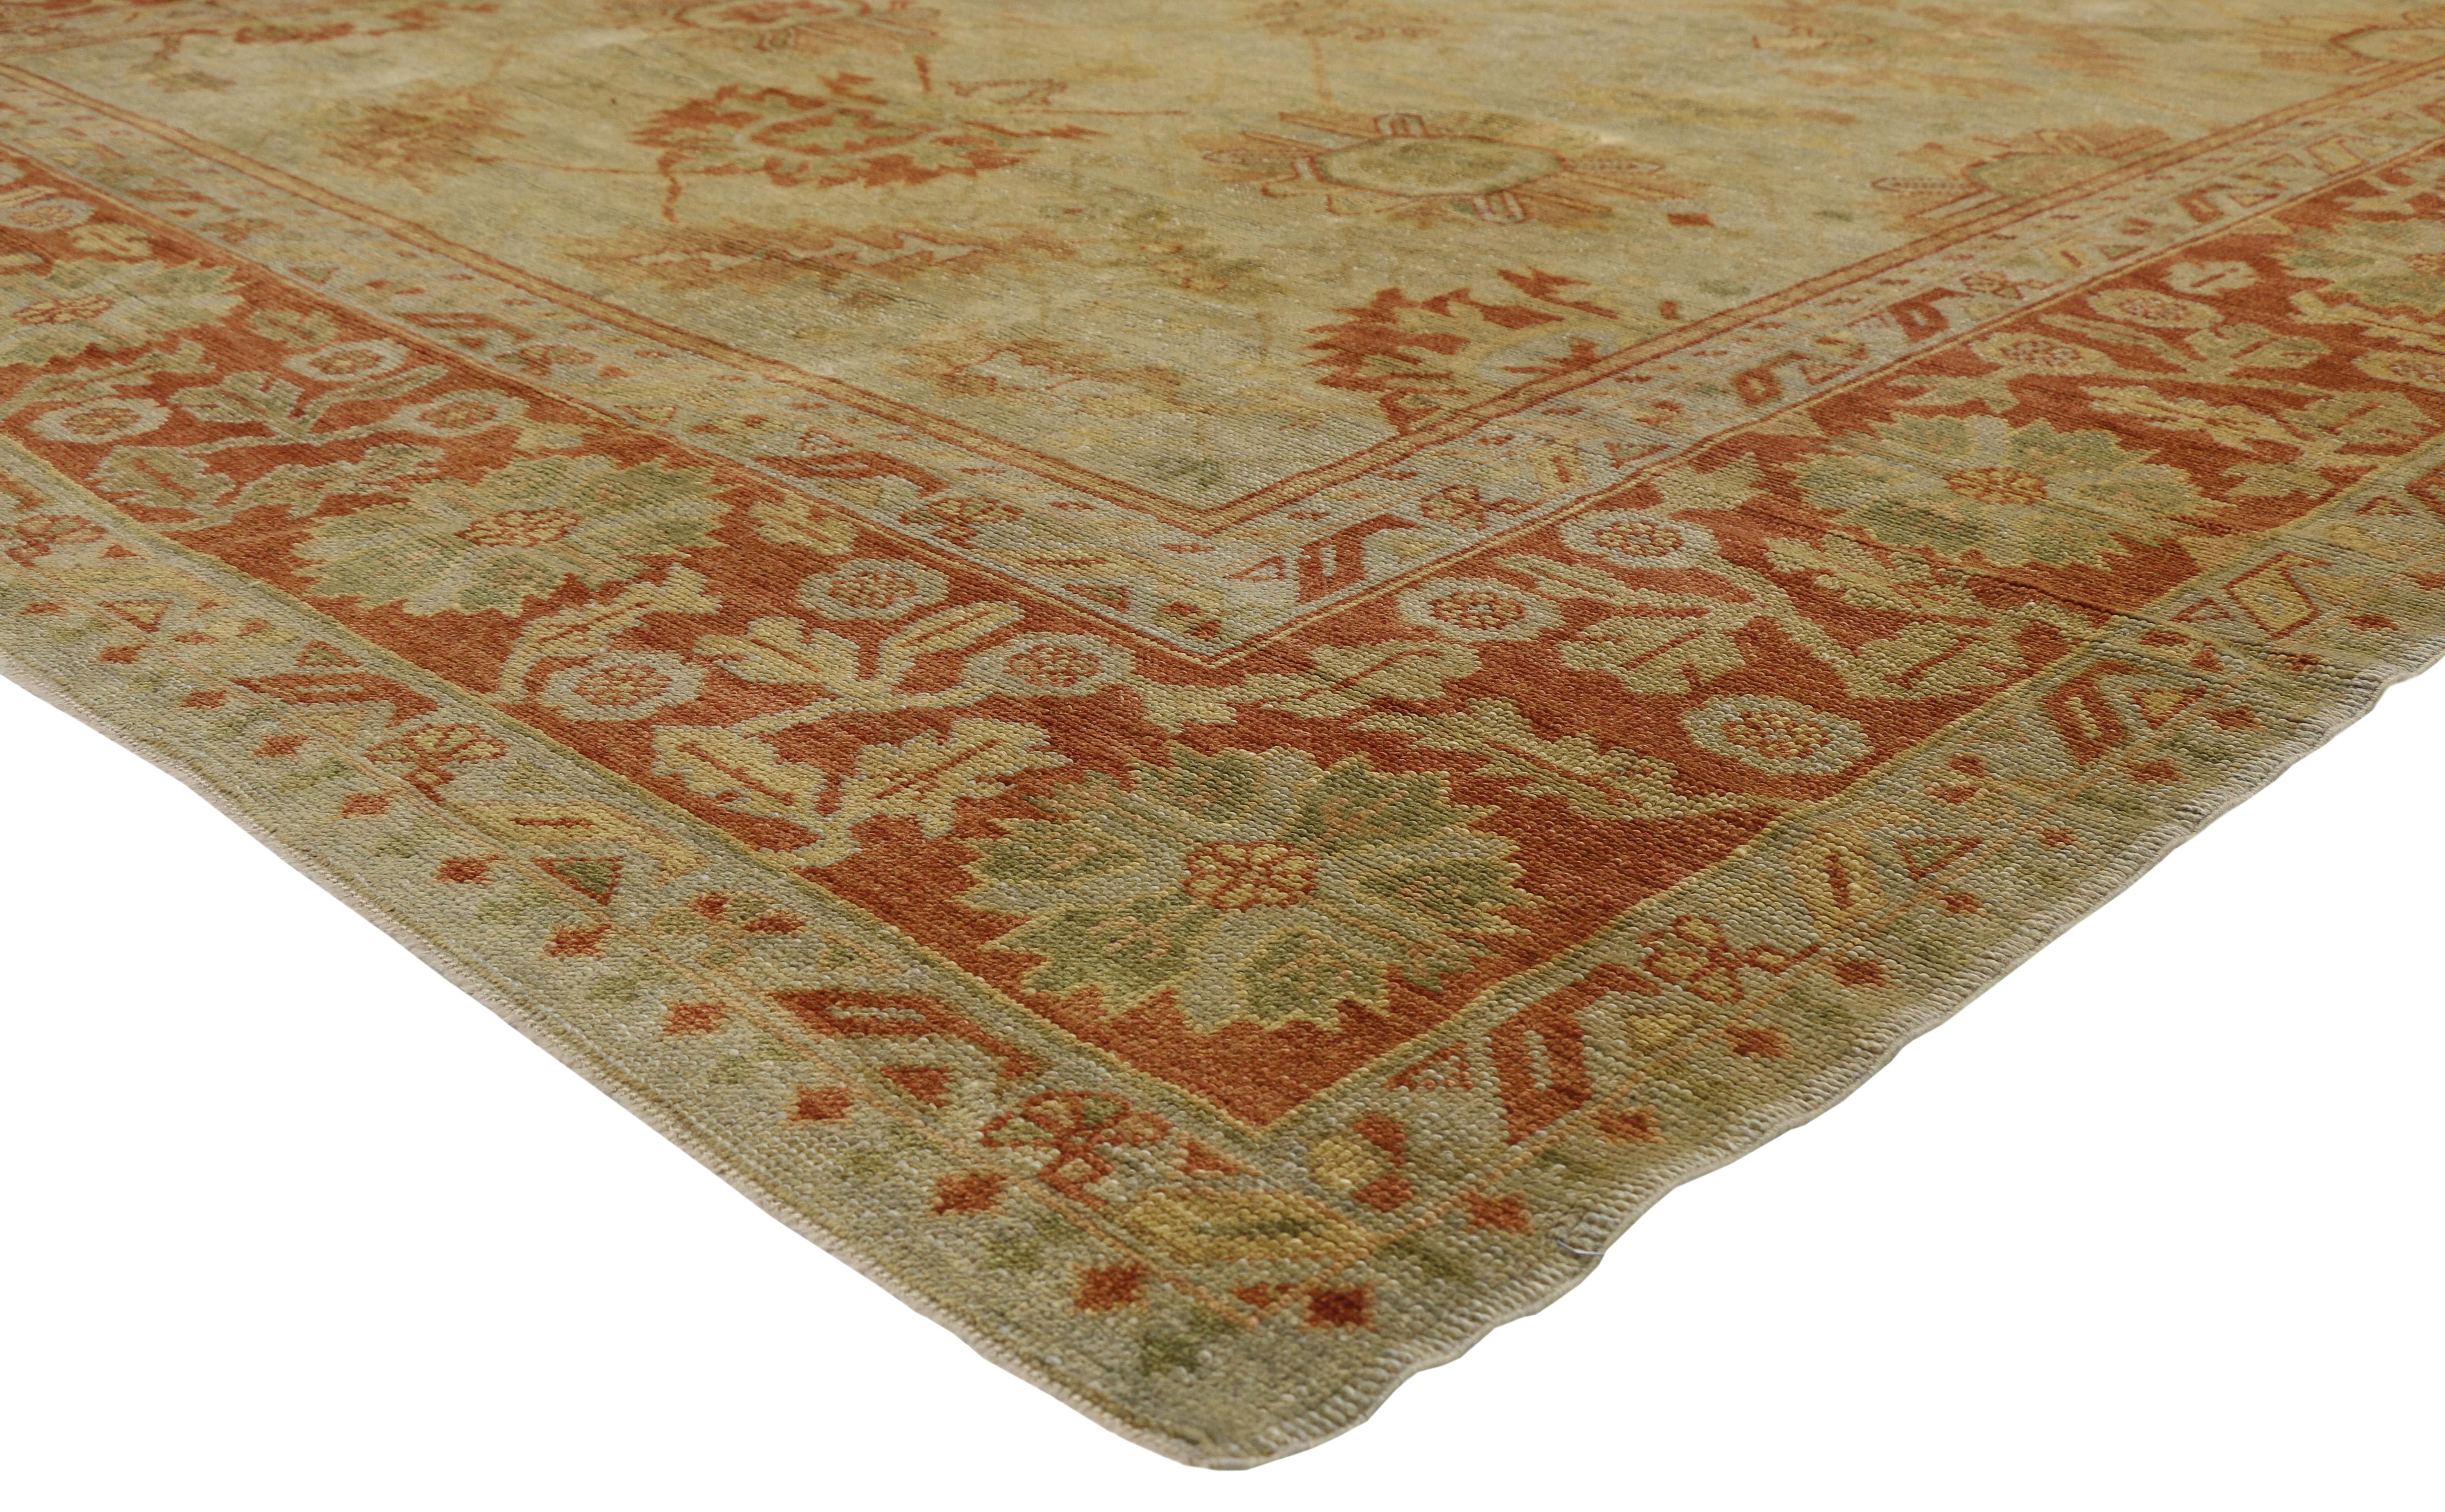 50368, contemporary Turkish Oushak area rug with Spanish Colonial style. This hand-knotted wool contemporary Turkish Oushak rug features large-scale stylized palmettes and lush serrated leaves connected with angular vines on an abrashed field. The